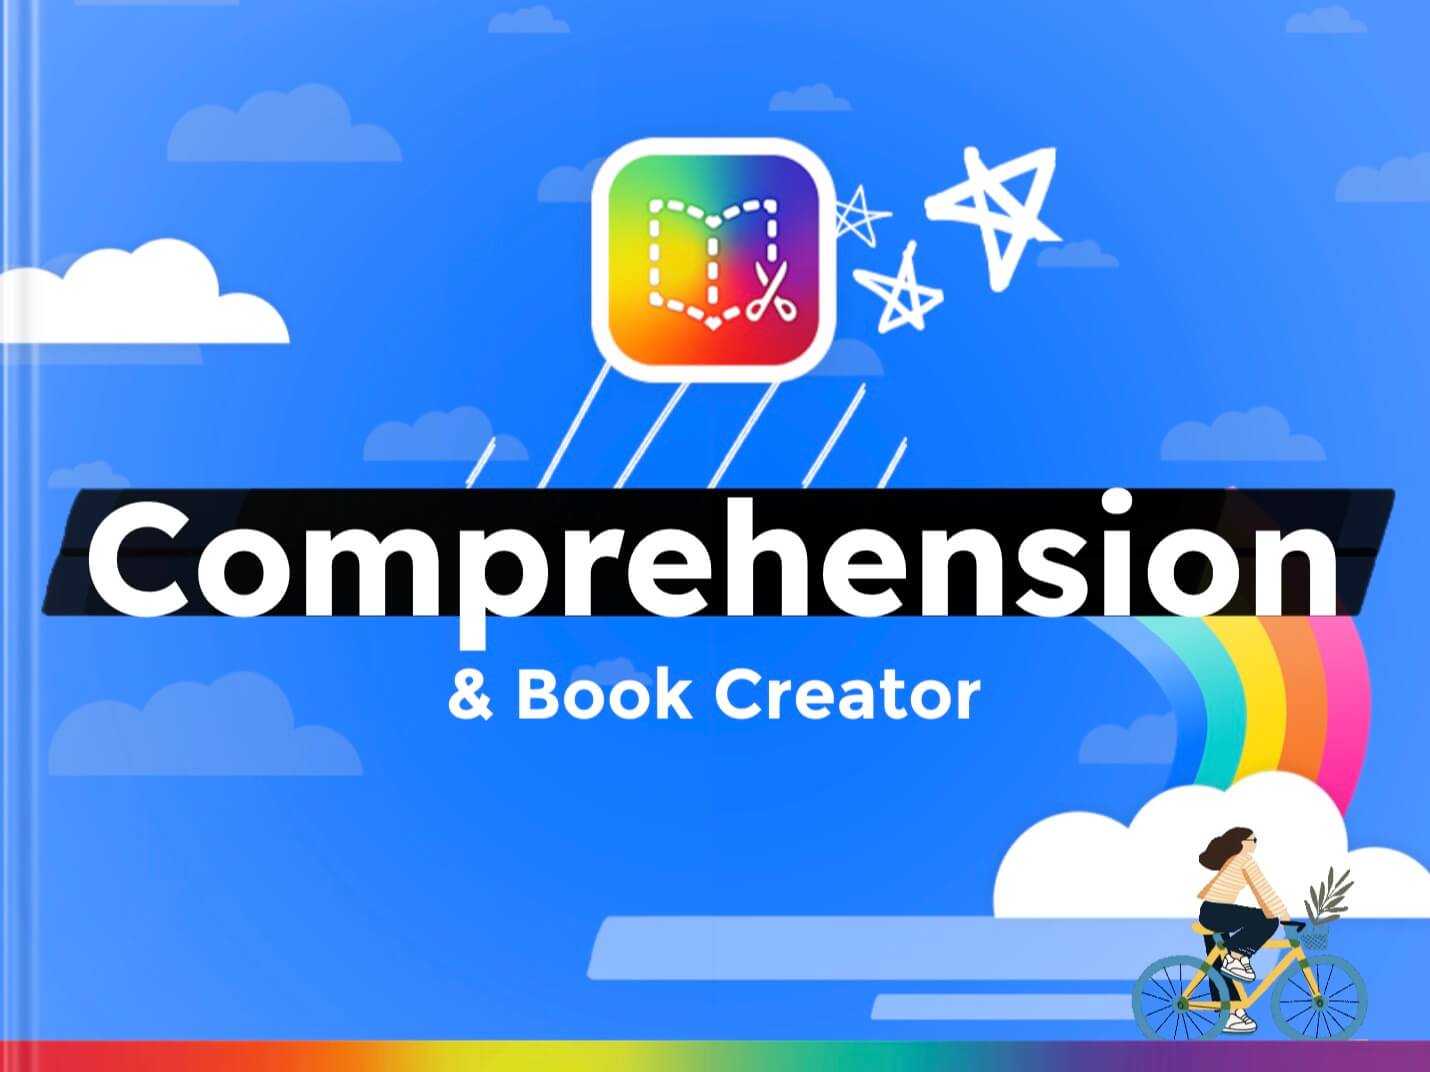 Comprehension and Book Creator